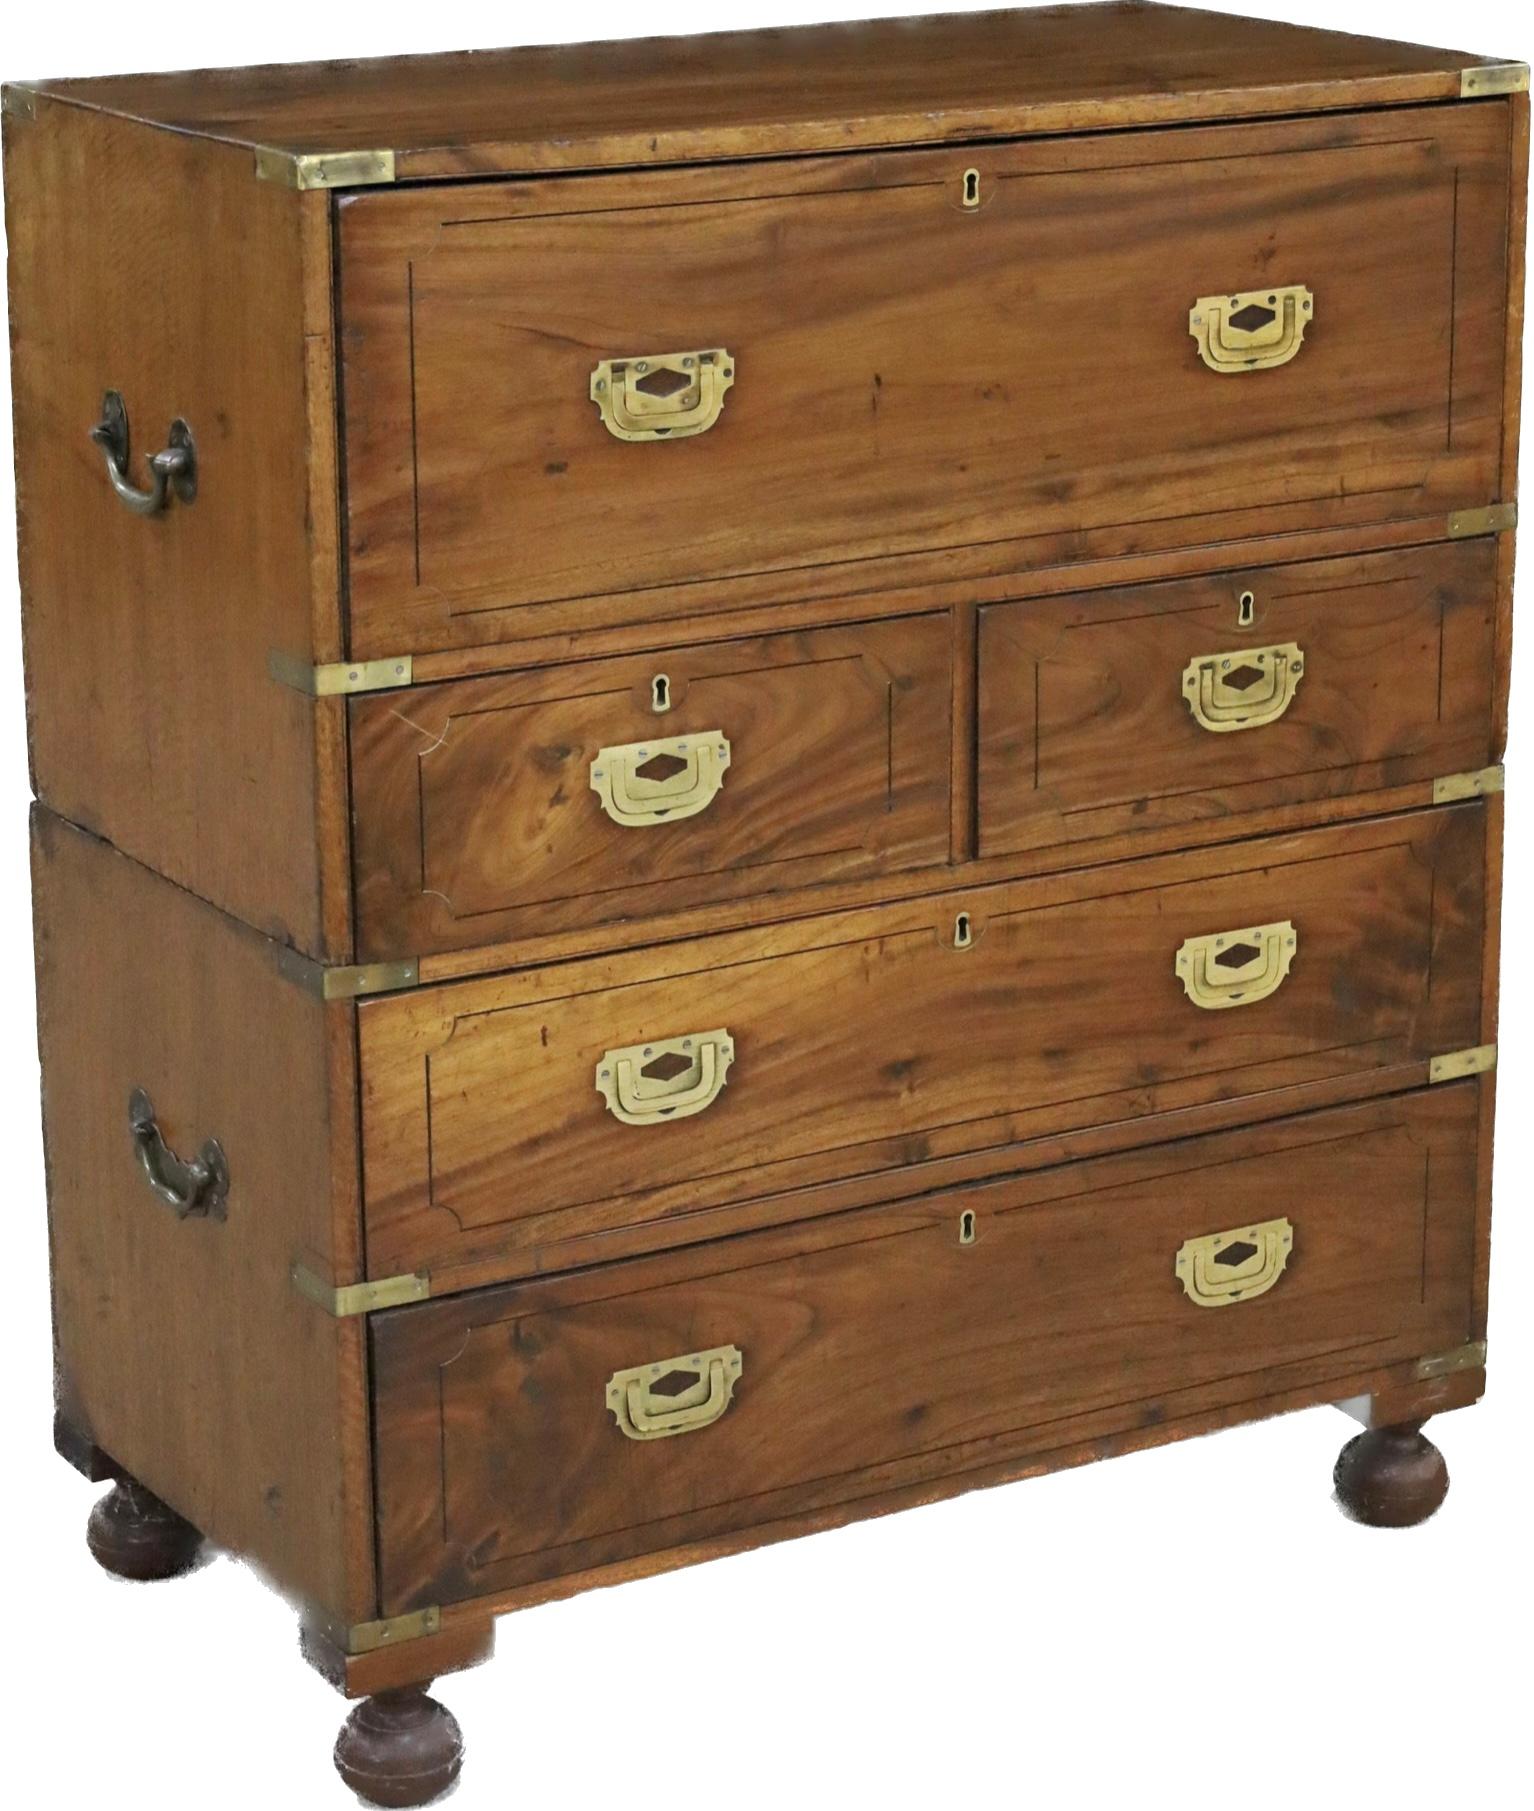 English 19th Century Camphor Wood Campaign Chest 1